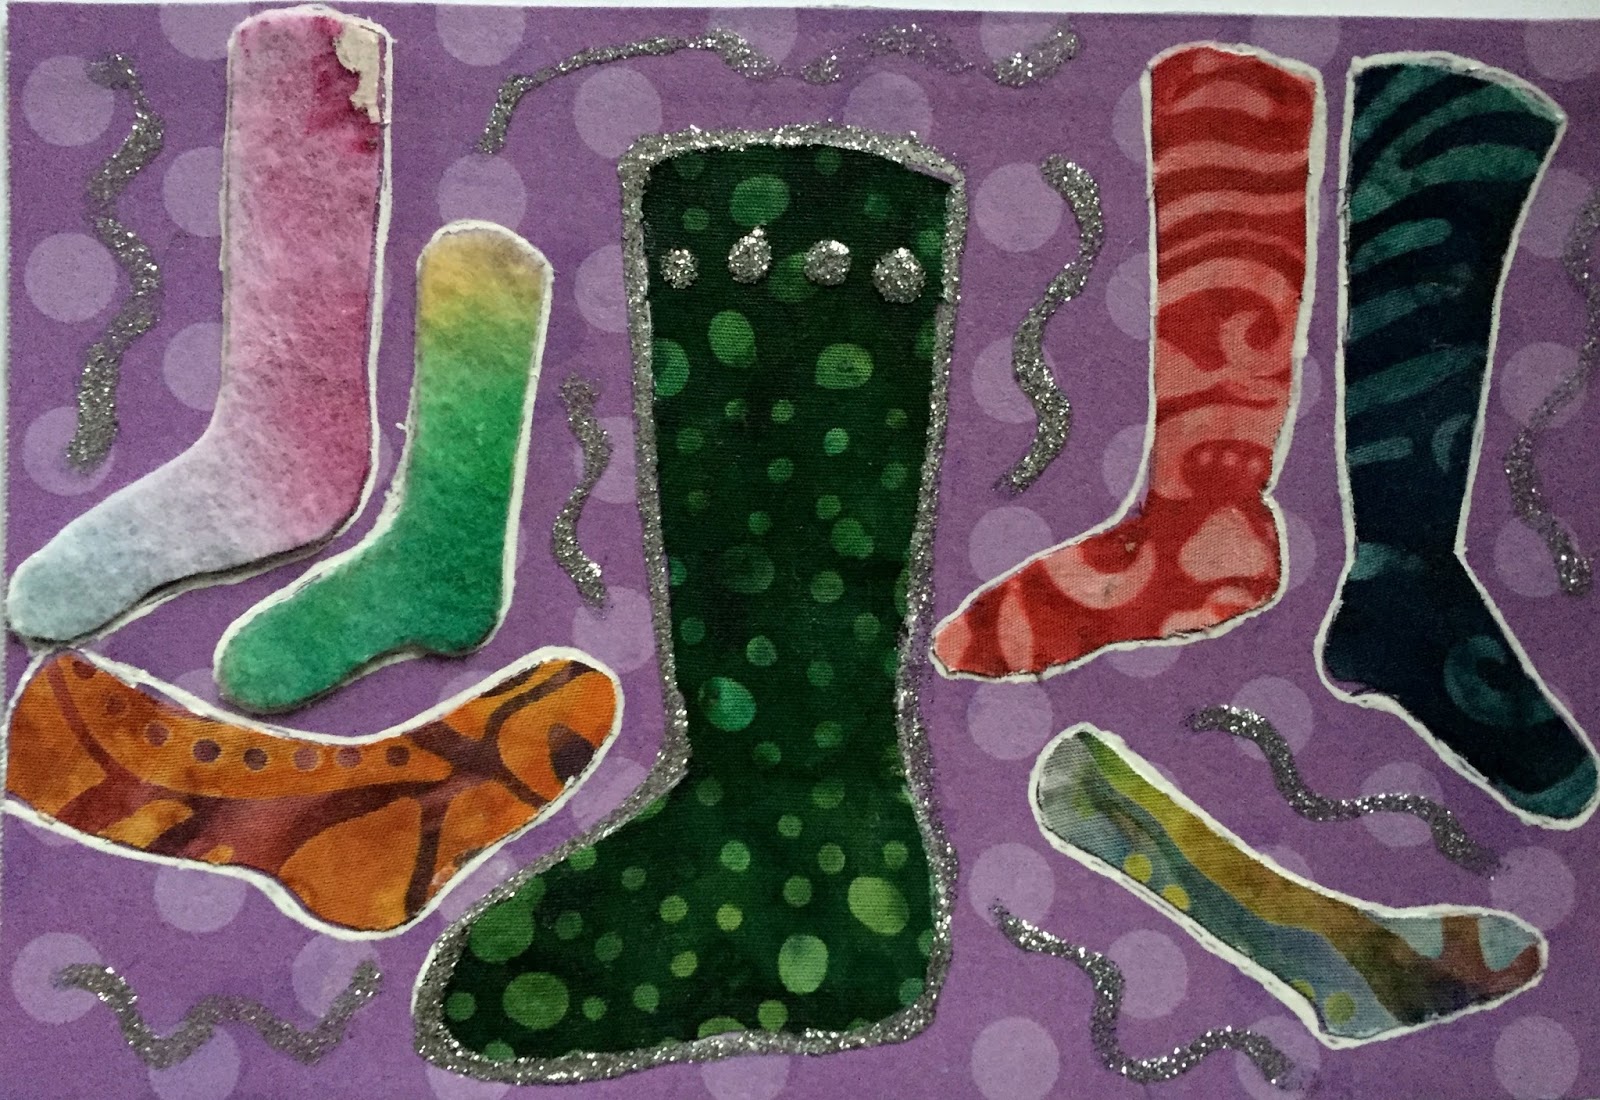 Mail me some art: Crazy, Colorful Socks! Post Card Swap - Send by ...